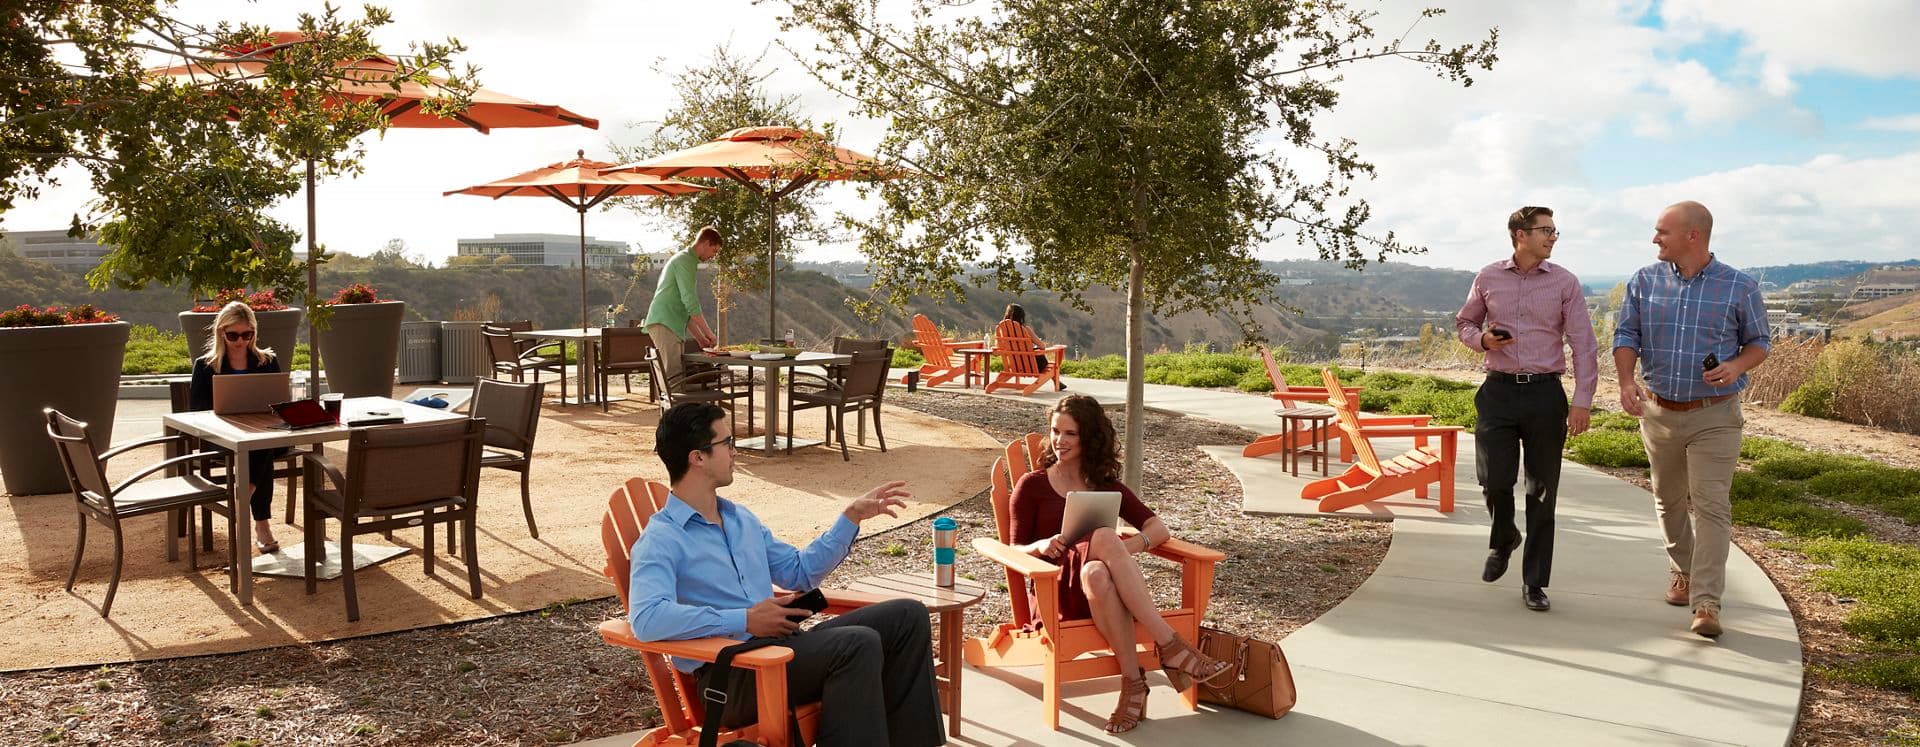 Outdoor Workspace - Eastgate - 4850 Eastgate Mall,  San Diego, CA 92121